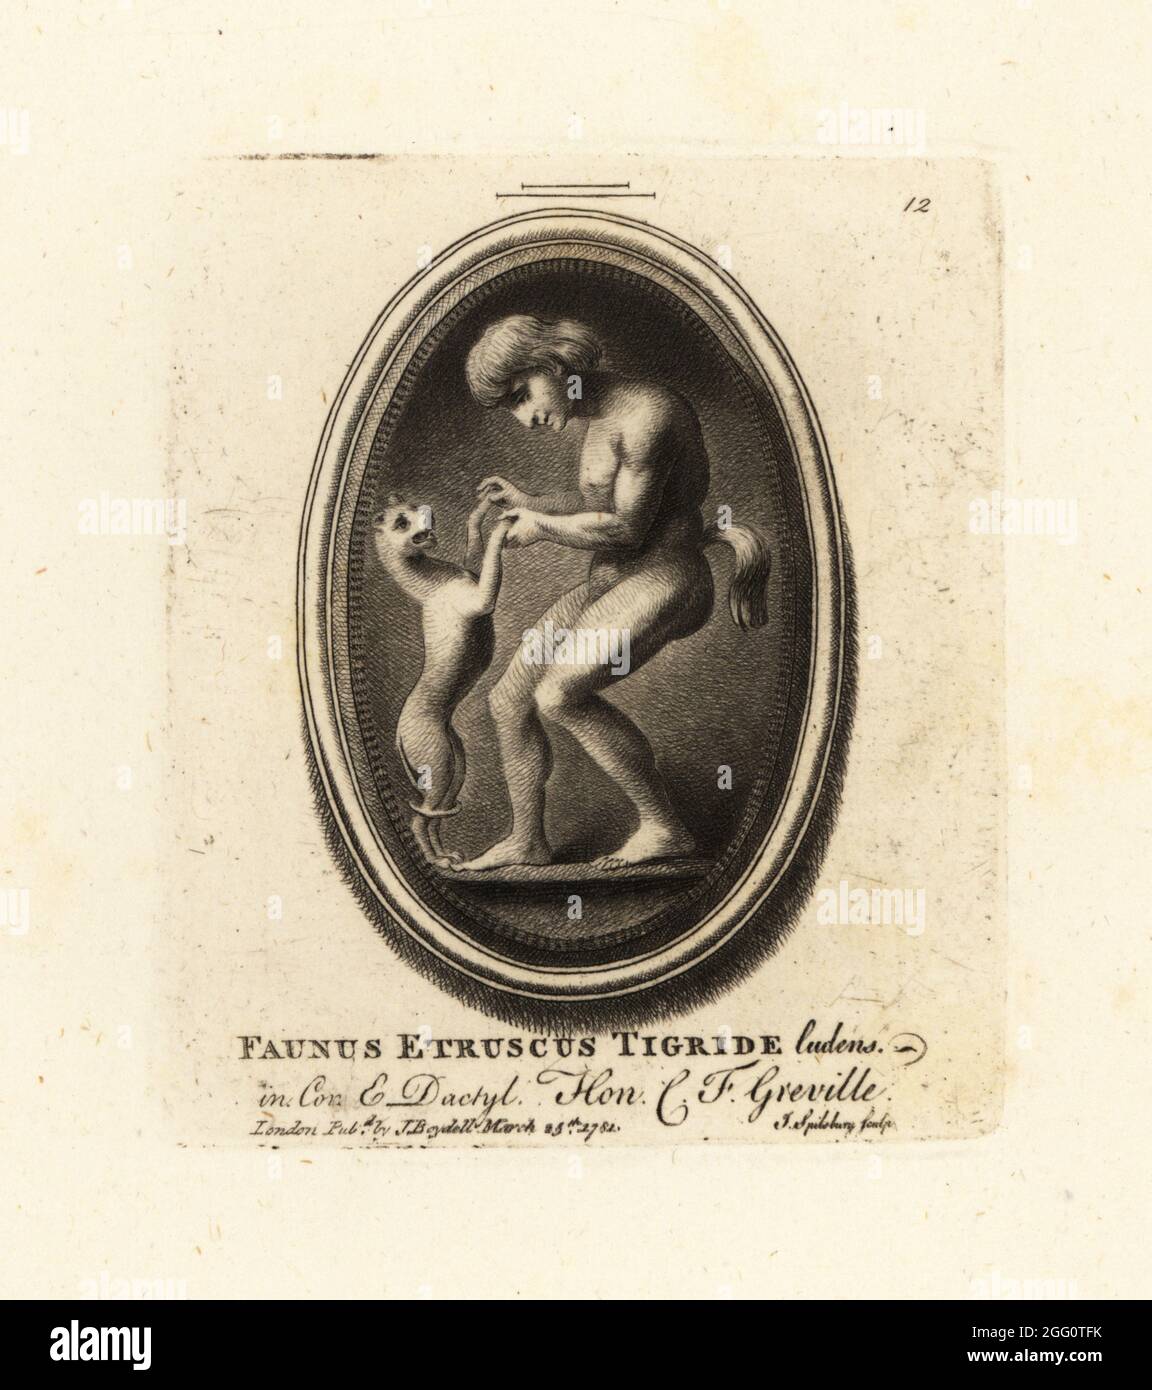 Etruscan faun playing with a tiger. In cornelian and dactylotheca. From the collection of the antiquarian Charles Francis Greville. Faunus Etruscus Tigride ludens in Cor. & Dactyl. Mezzotint copperplate engraving by John Spilsbury from his Collection of Fifty Prints from Antique Gems, John Boydell, London, 1785. Stock Photo